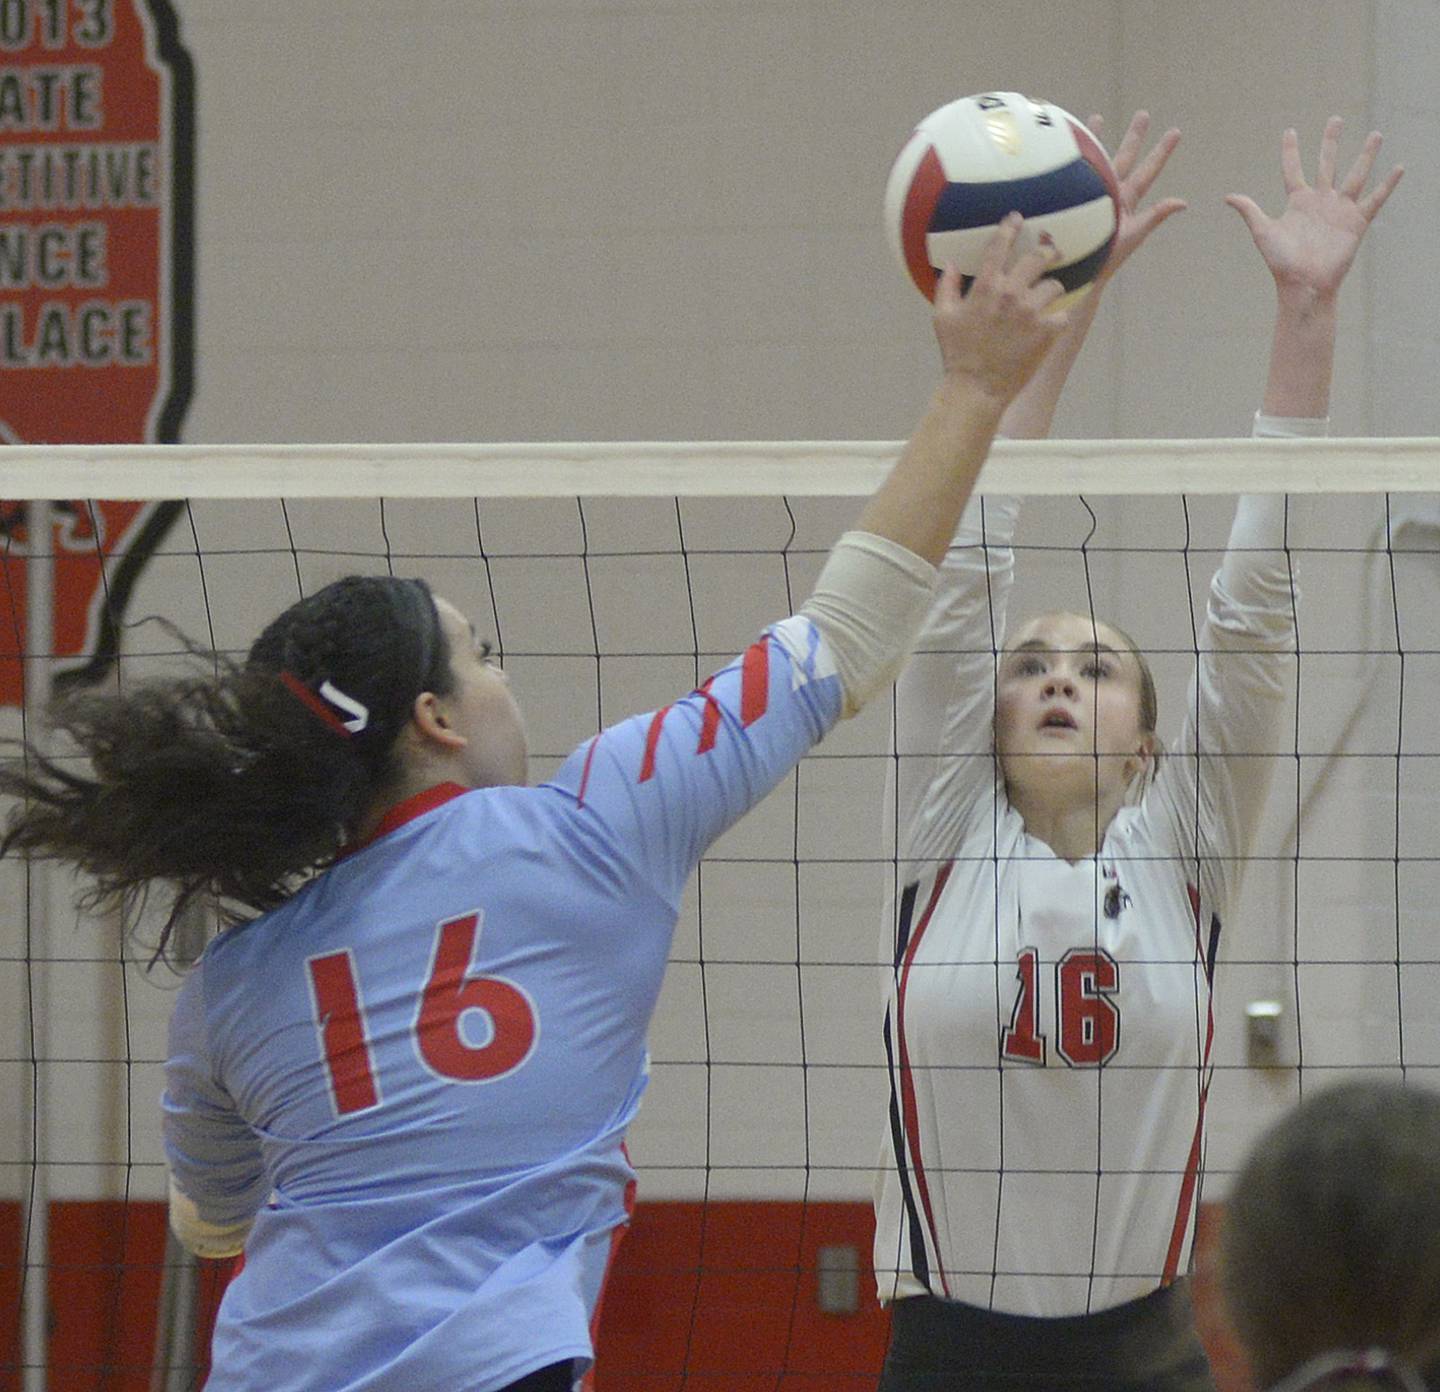 Ottawa’s Chey Joachim works to get the ball past the block of Streator’s Devin Elias  in the second match Thursday at Streator.